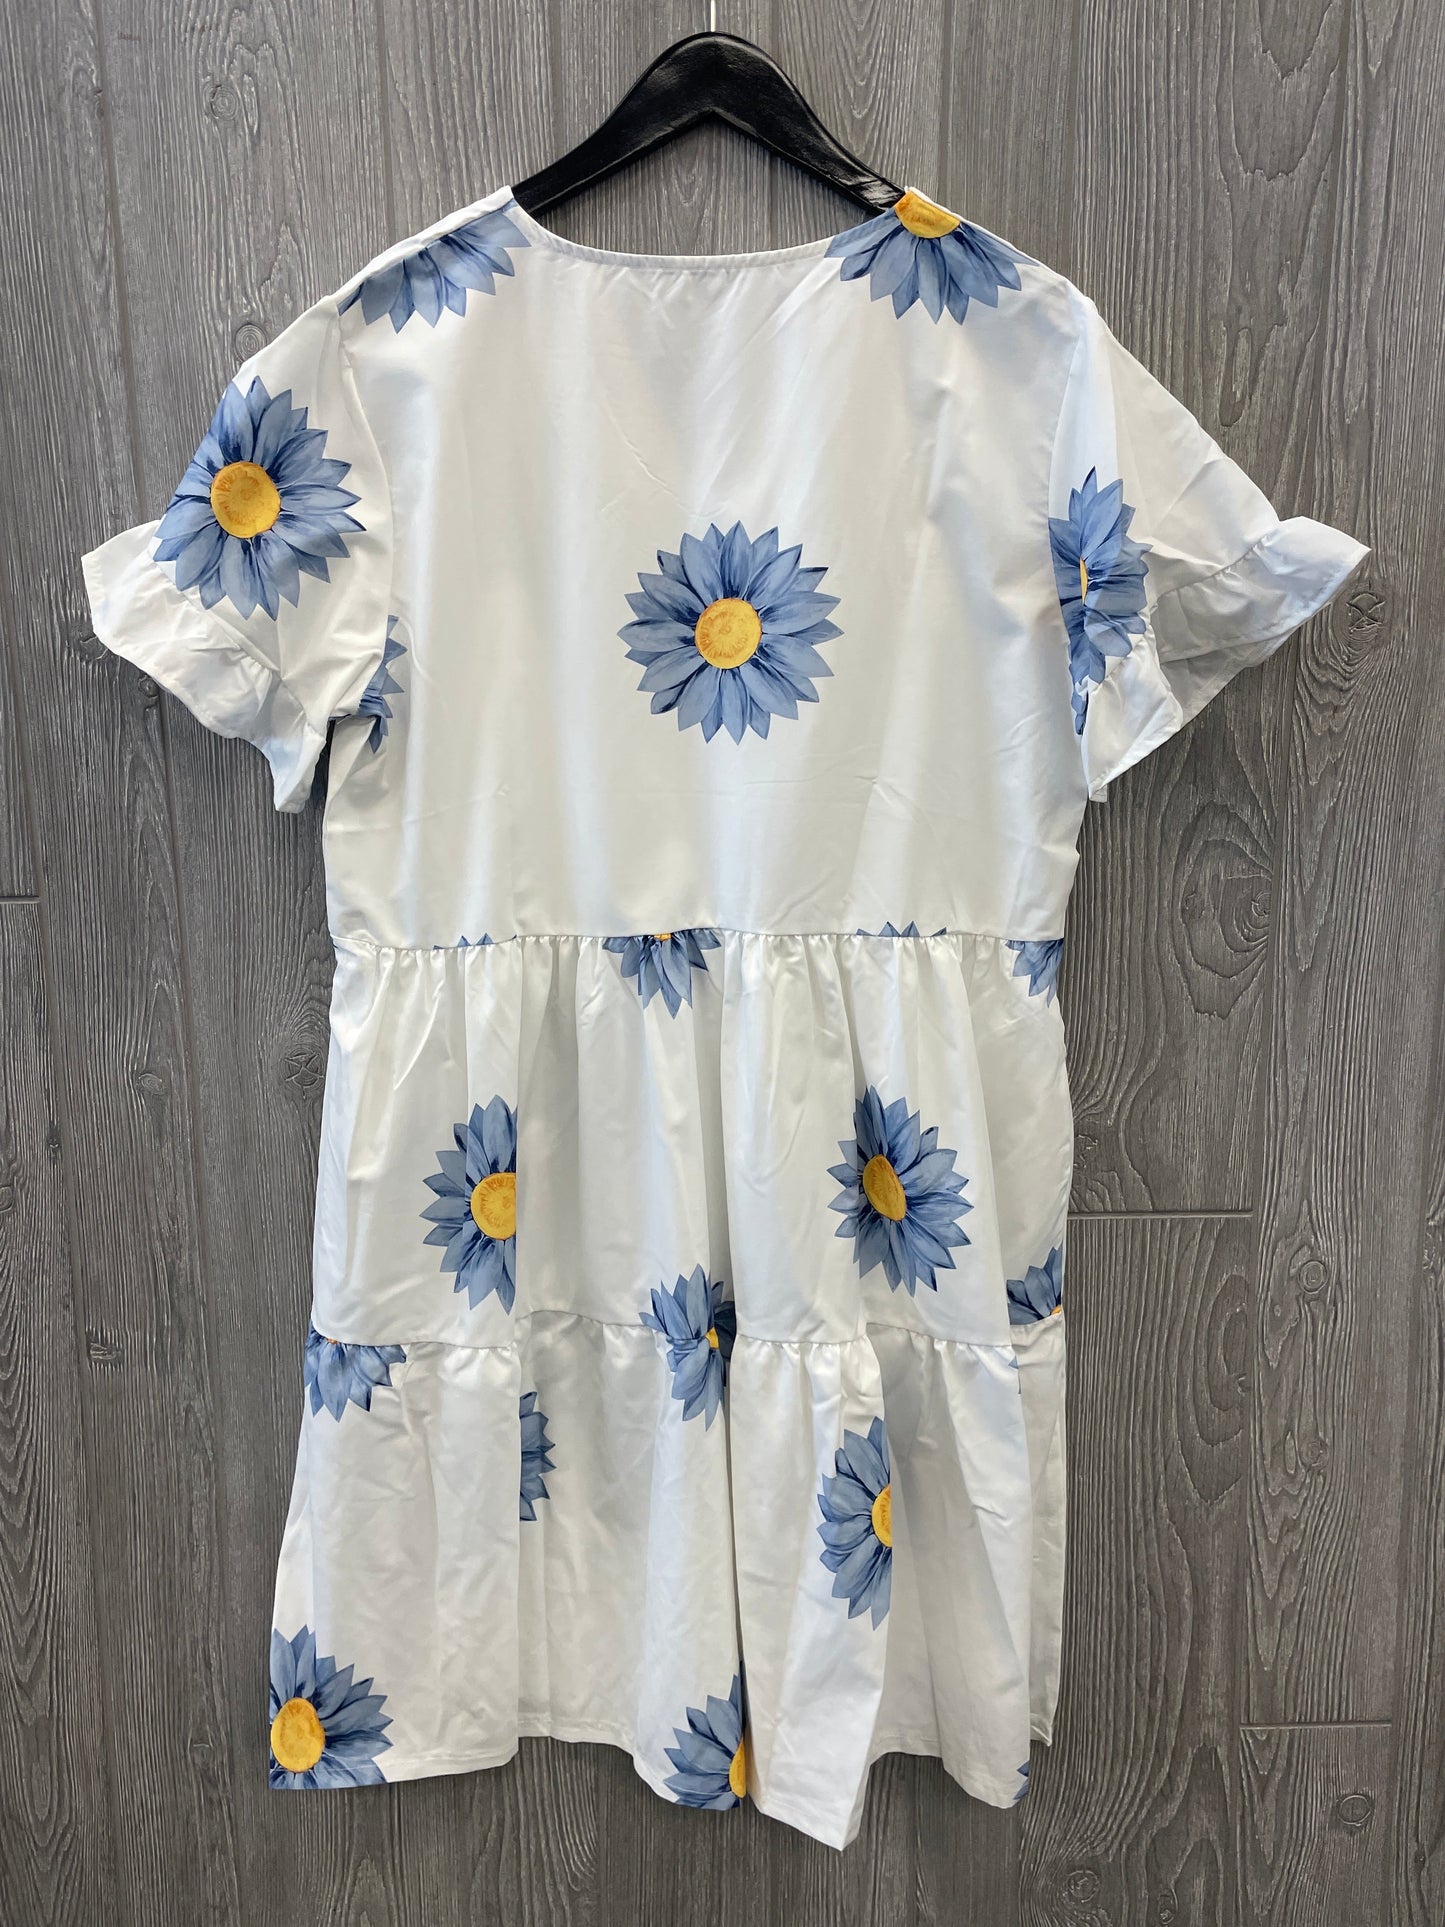 White Dress Casual Midi Clothes Mentor, Size 1x